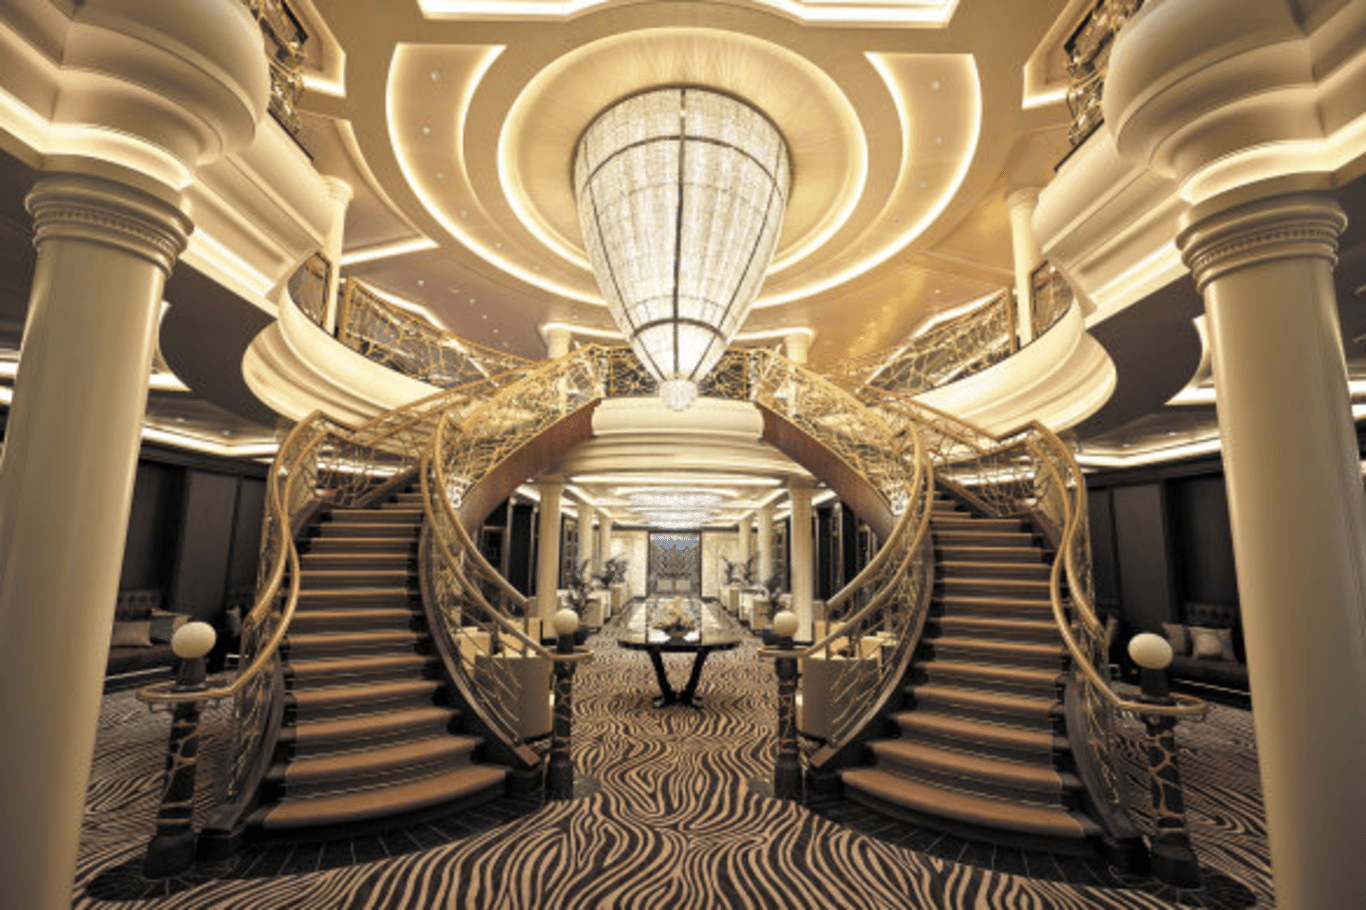 The Stunning Interiors of the Seven Seas Explorer: A Feast for the Senses